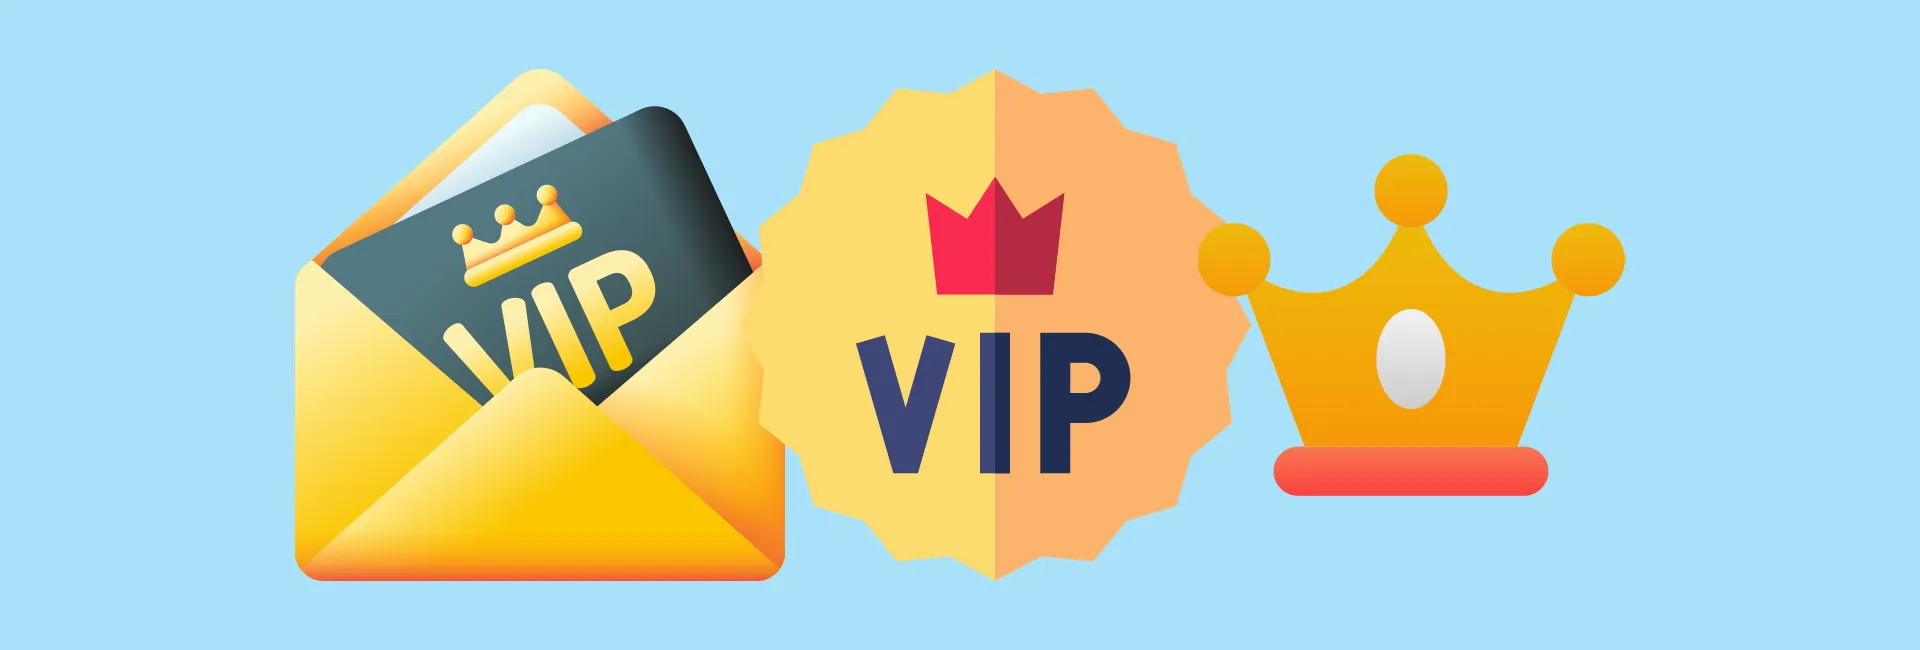 VIP Programs in Online Casinos for High Rollers